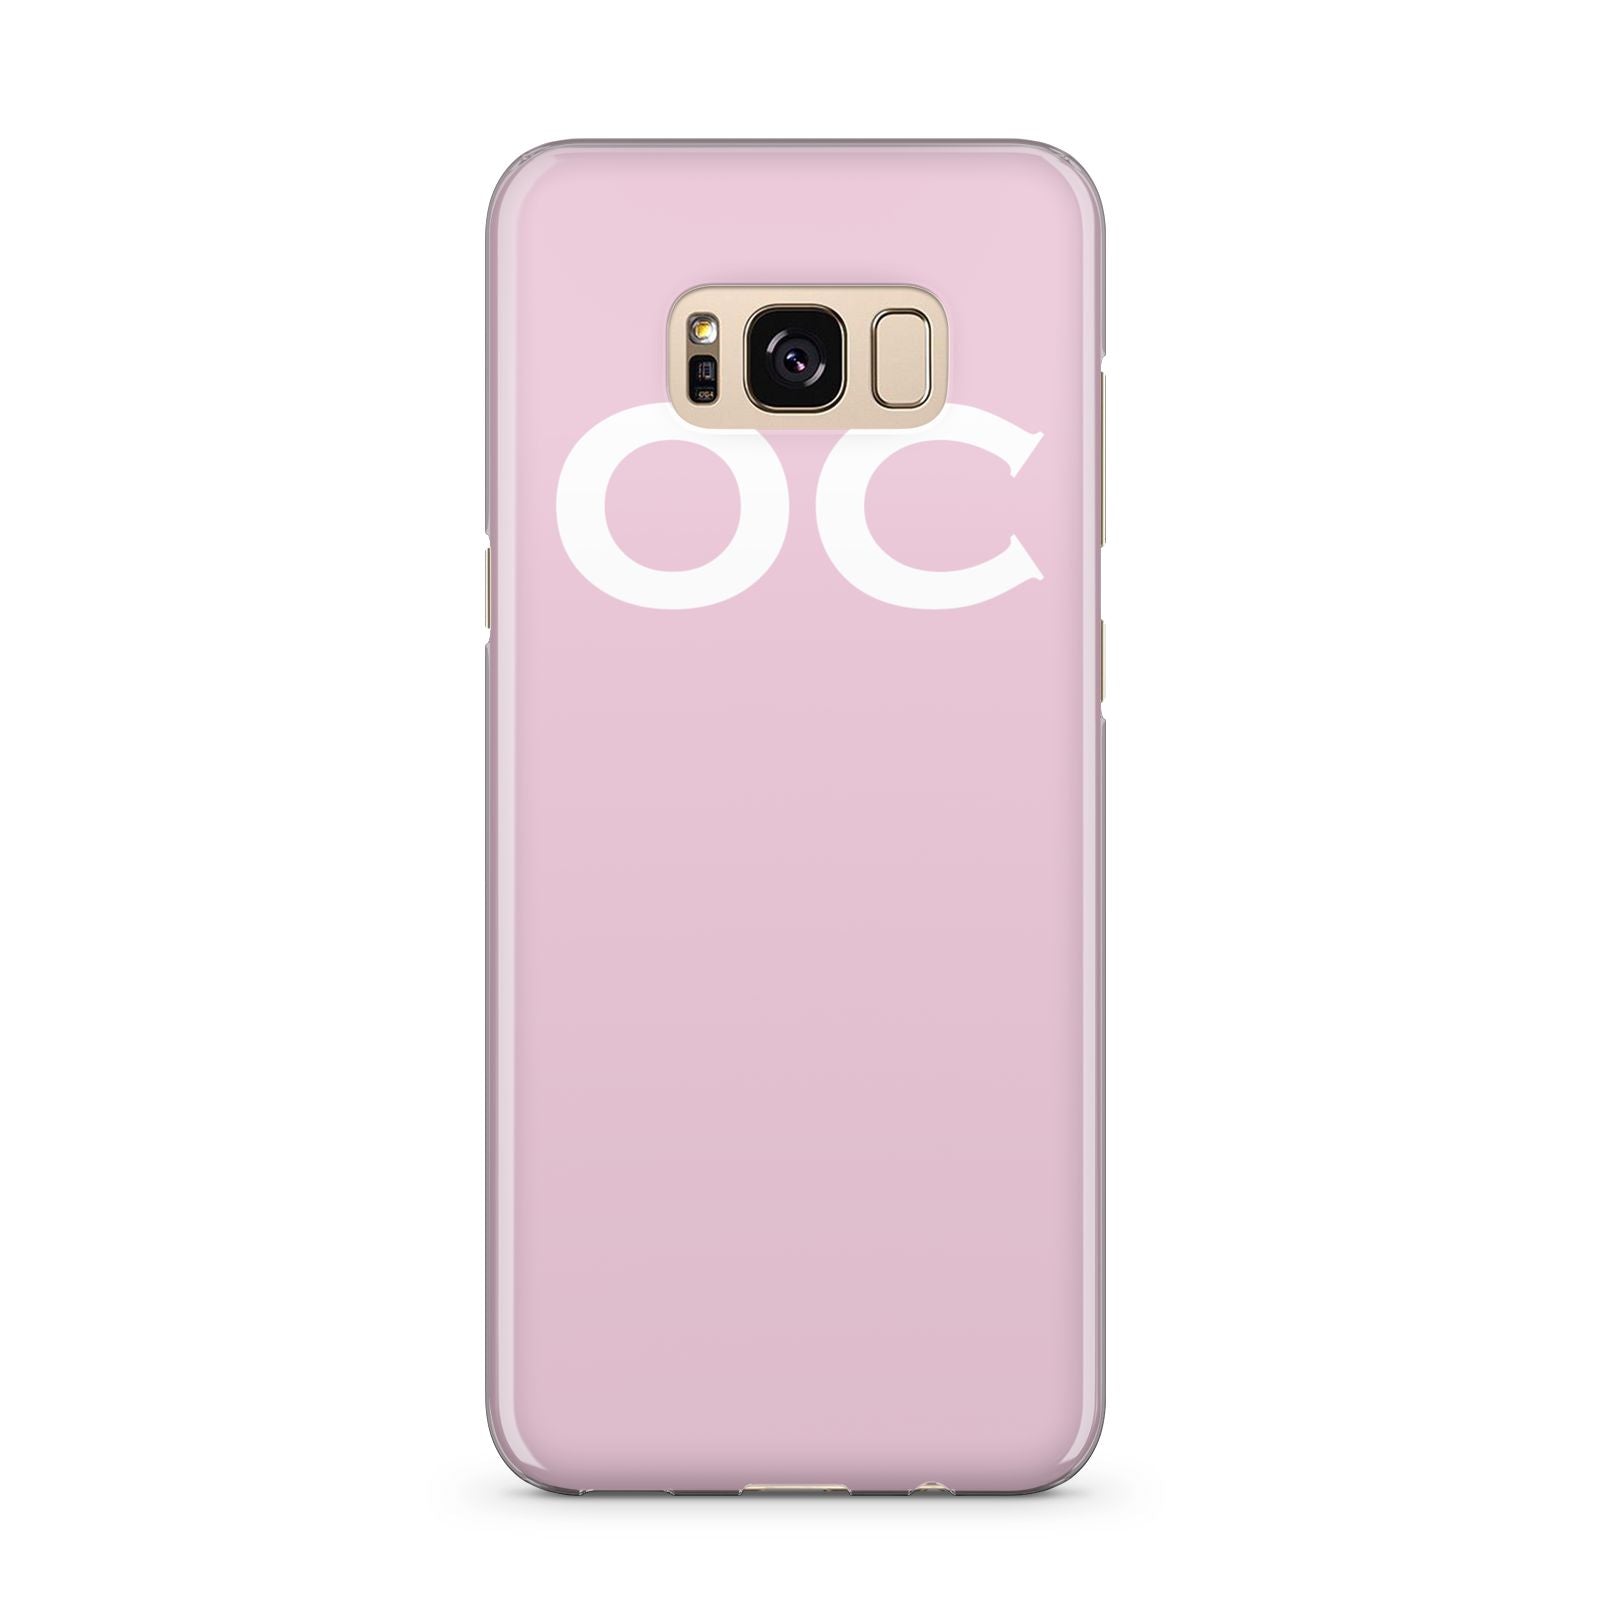 Personalised Initials 2 Samsung Galaxy S8 Plus Case